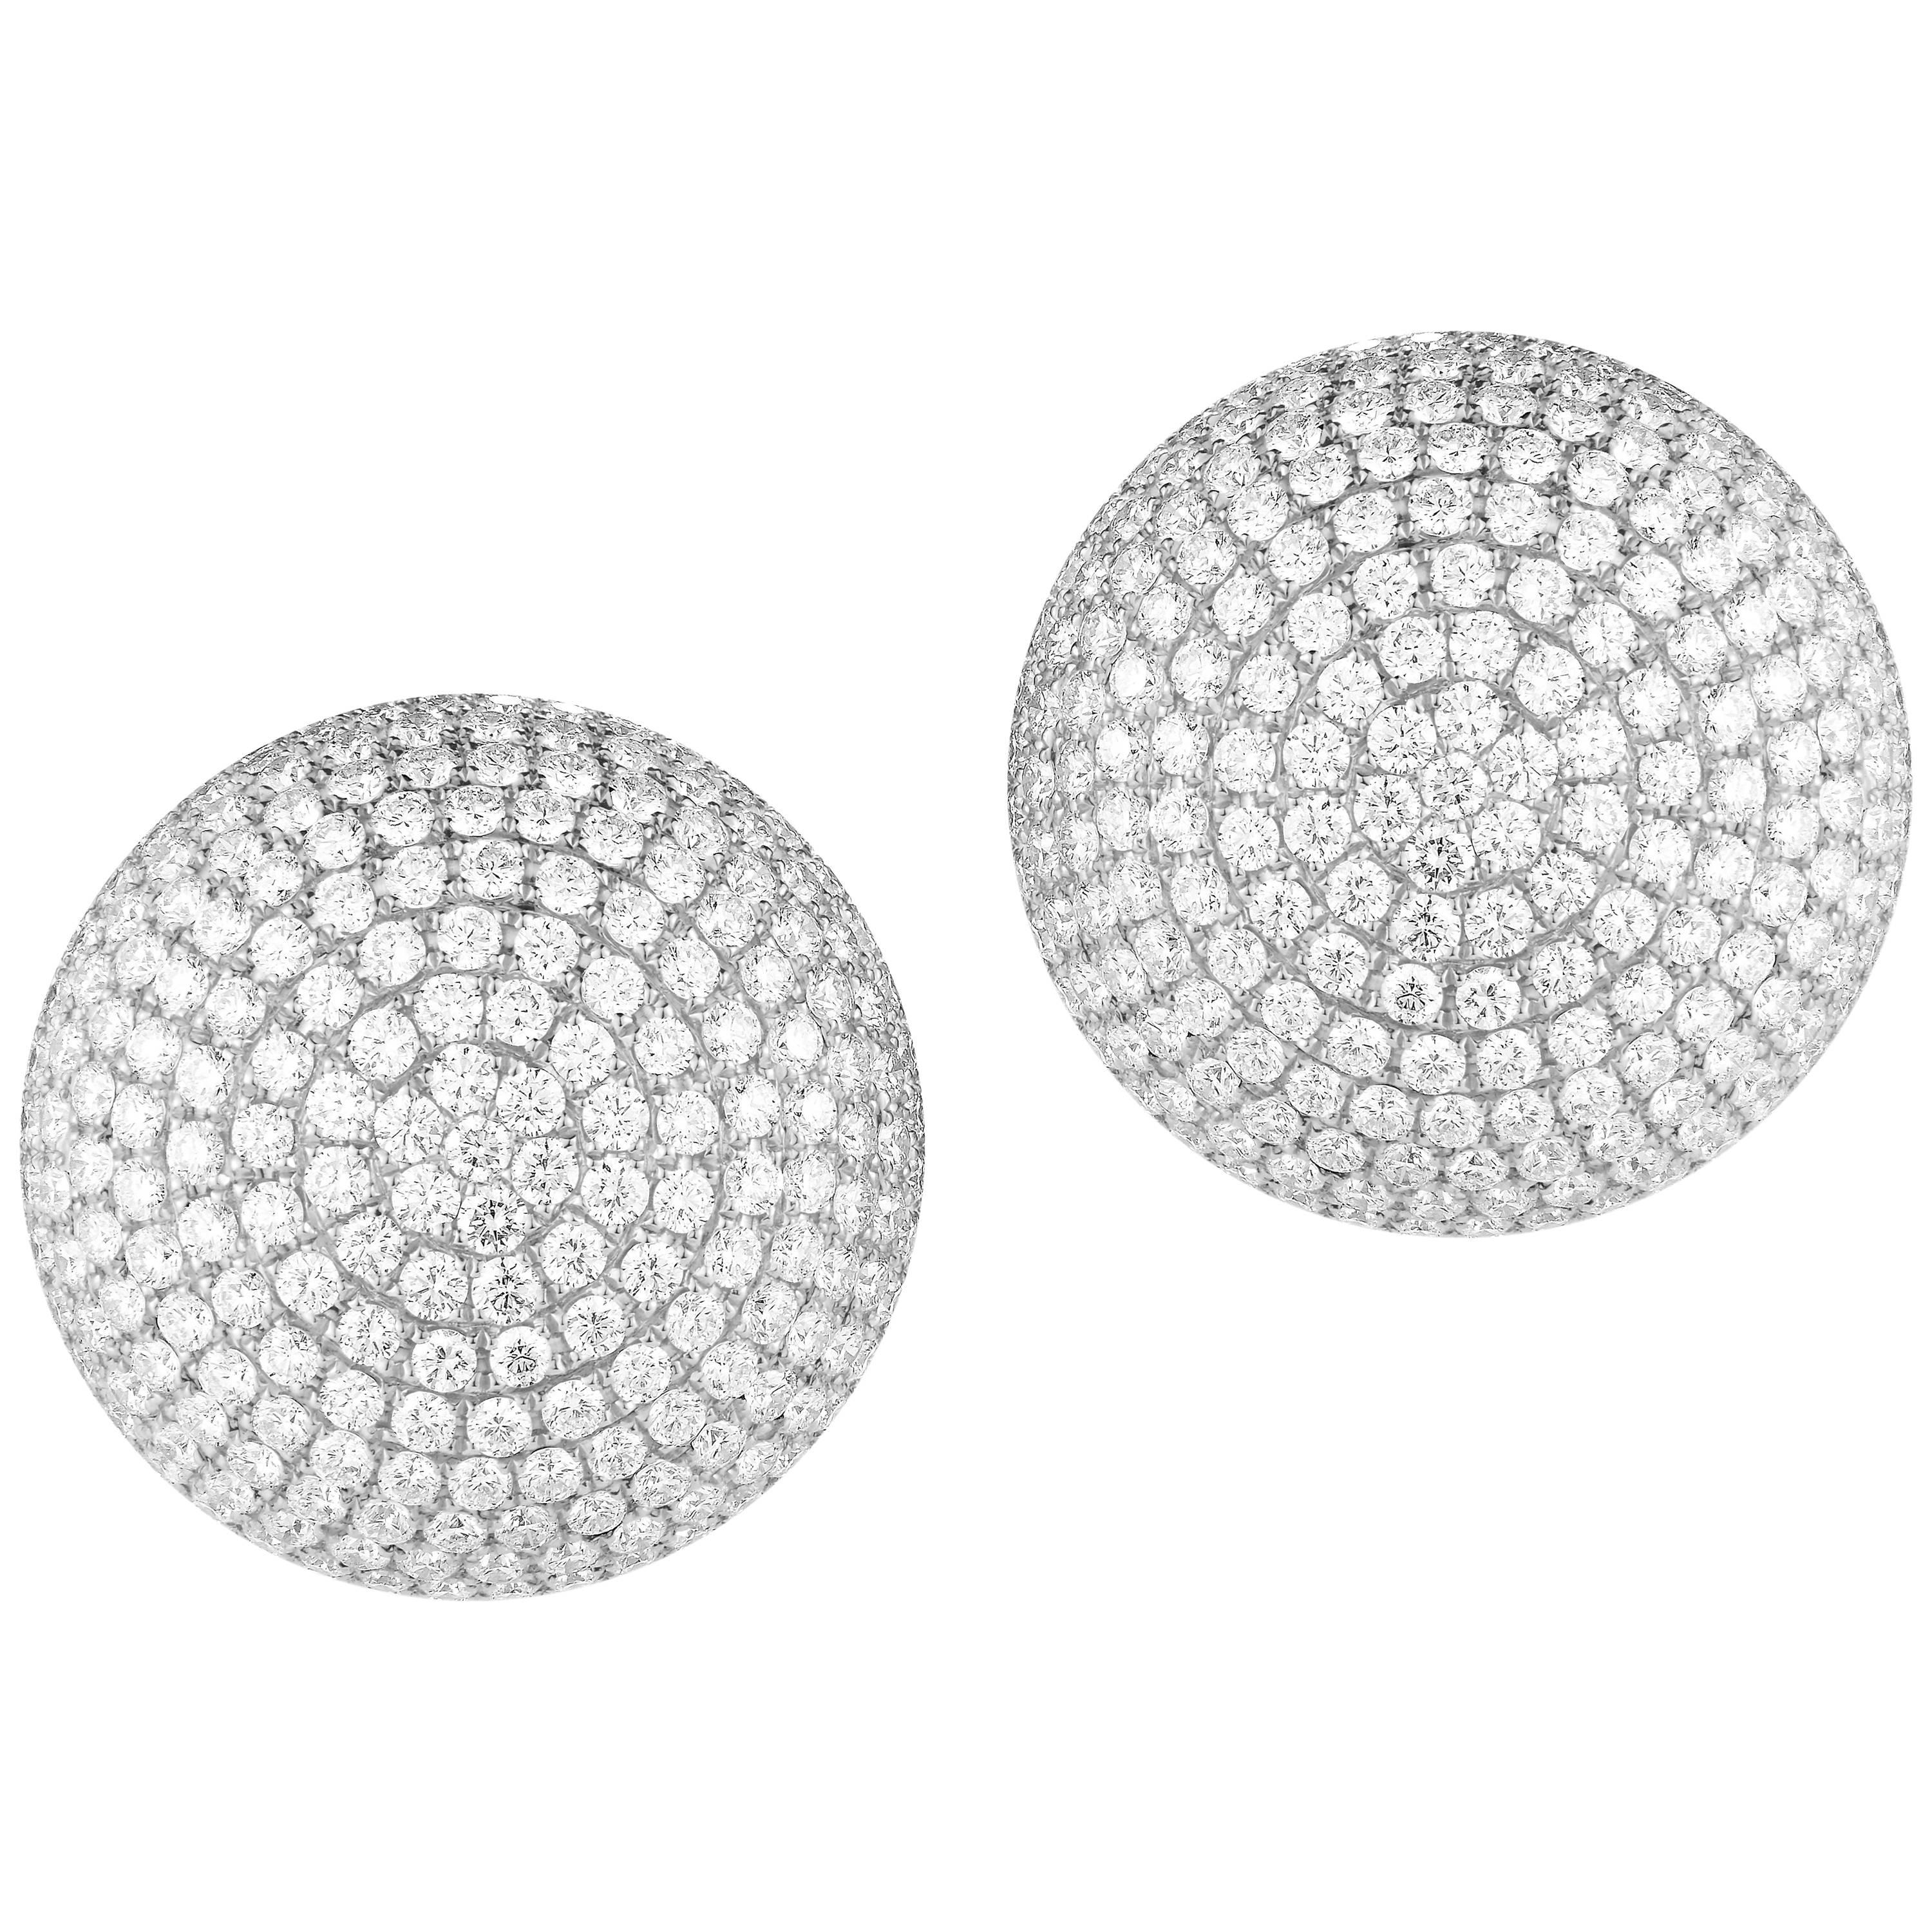 Magnificent Large Diamond Button Earrings in 18 Karat White Gold